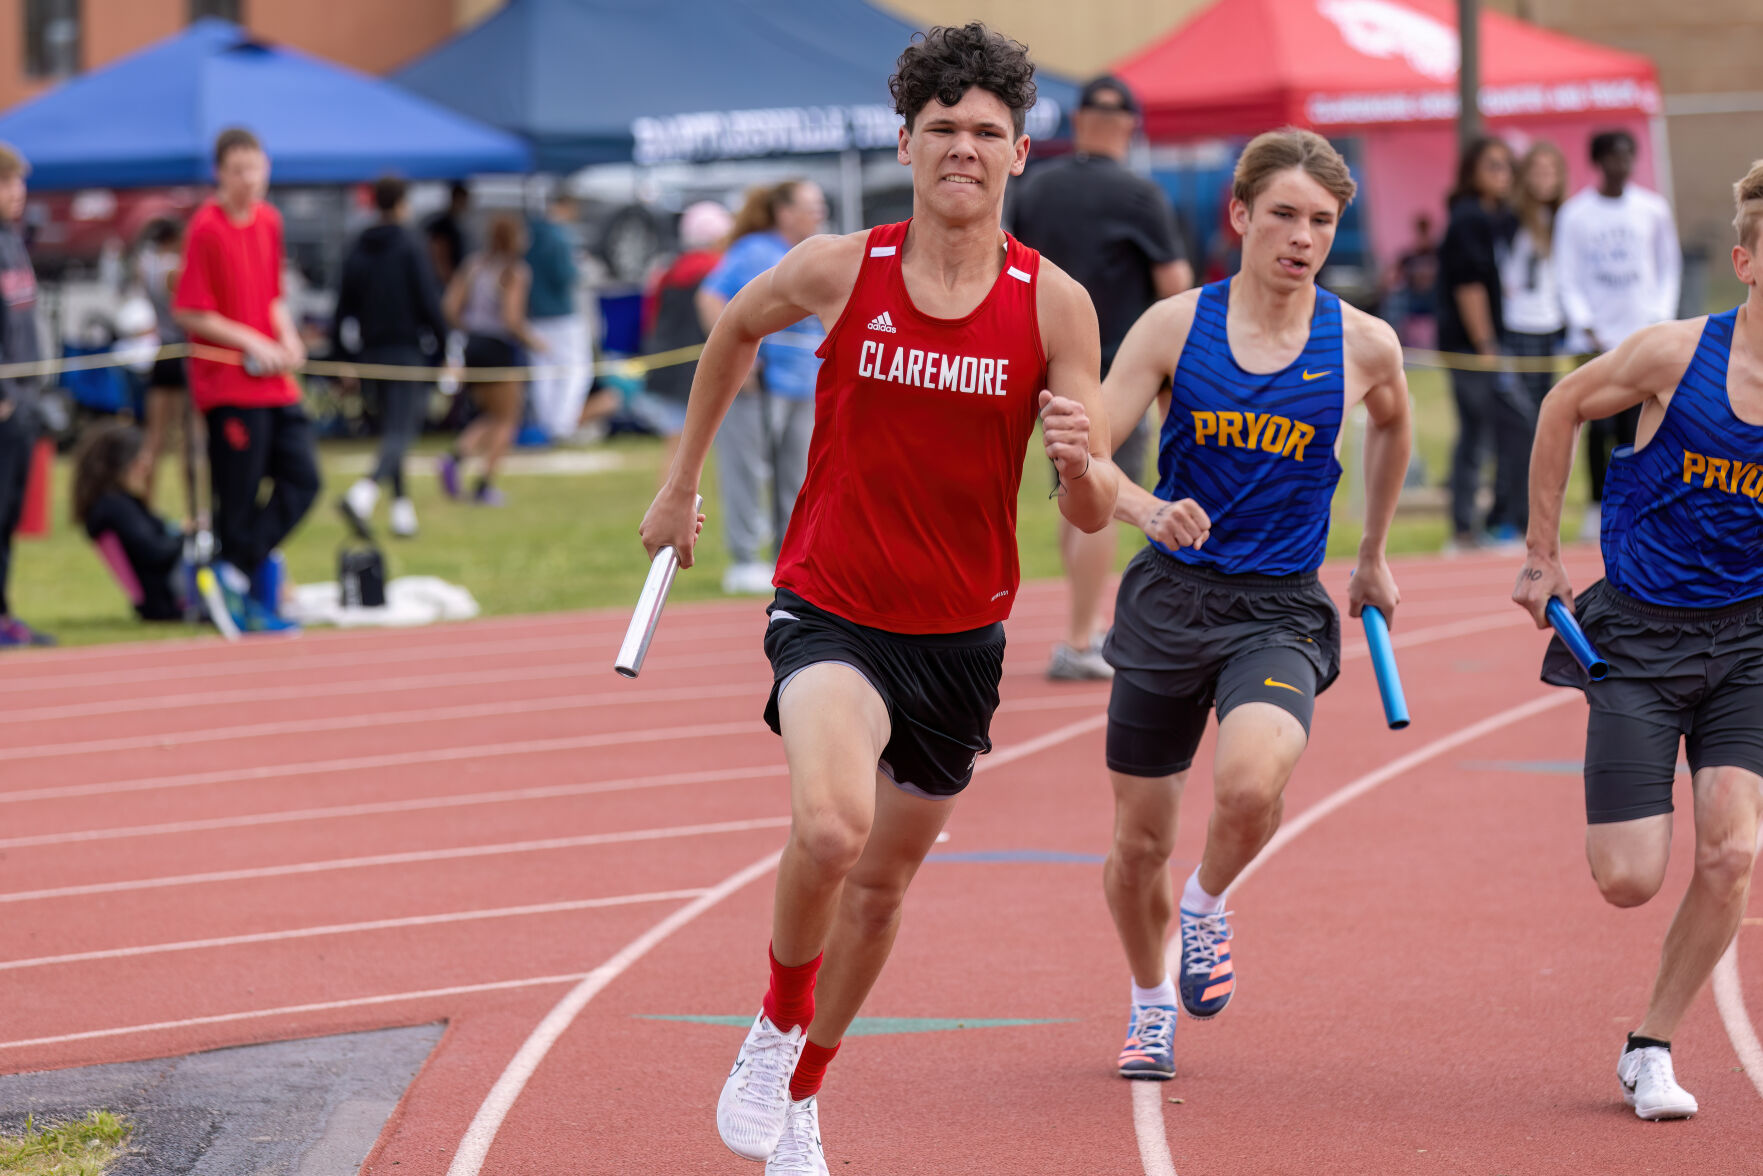 Claremore Track & Field Excel at Hornets Classic: Bean, Reavis Lead the Charge